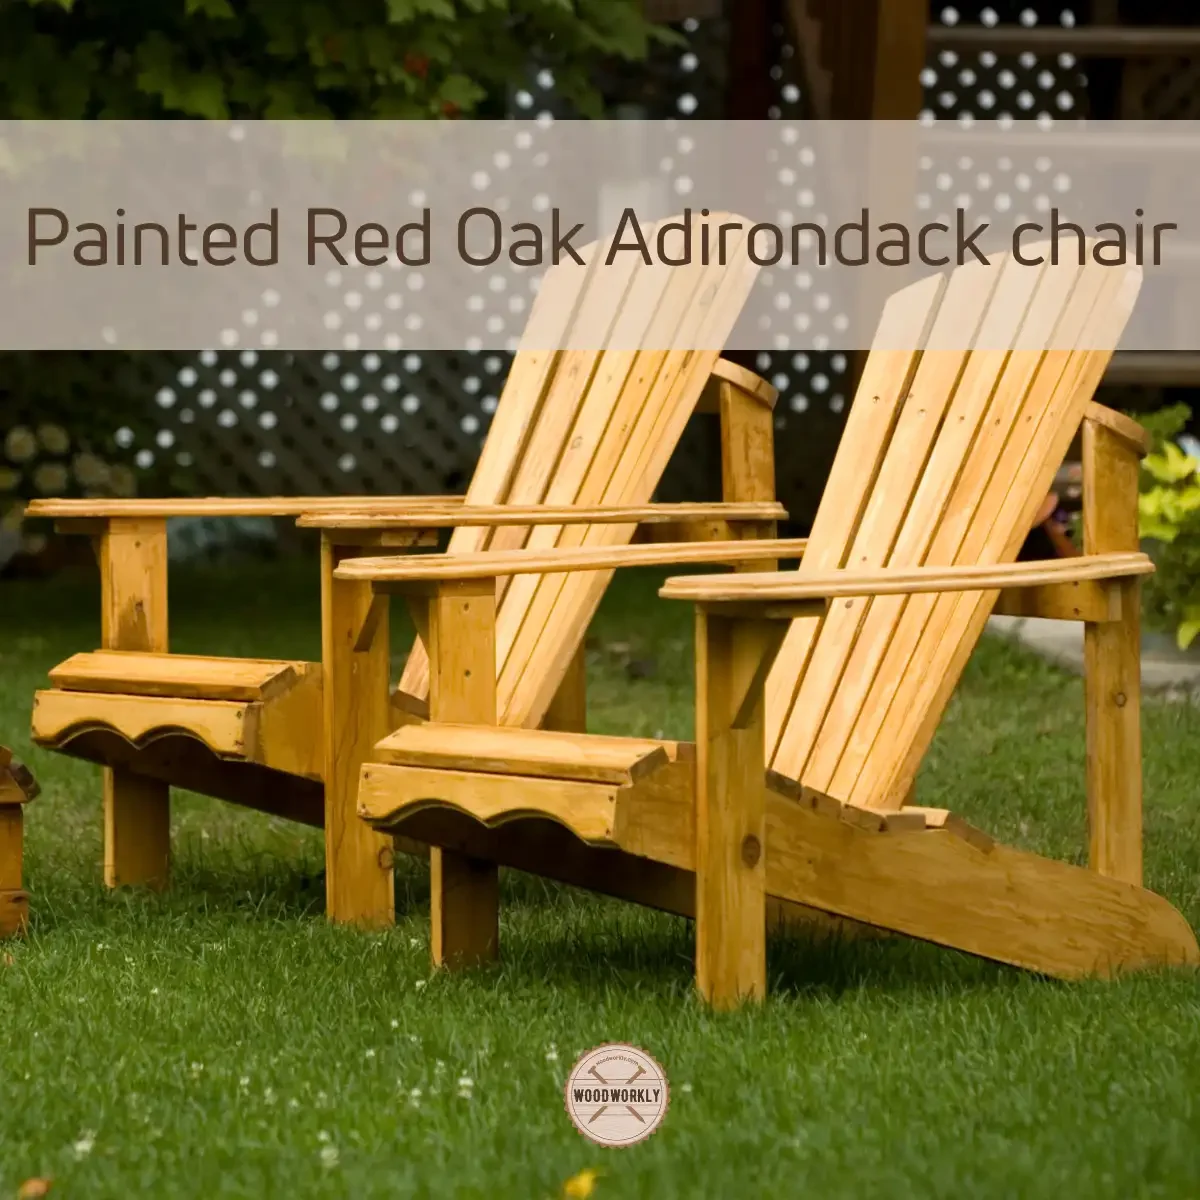 Painted Red Oak Adirondack chair